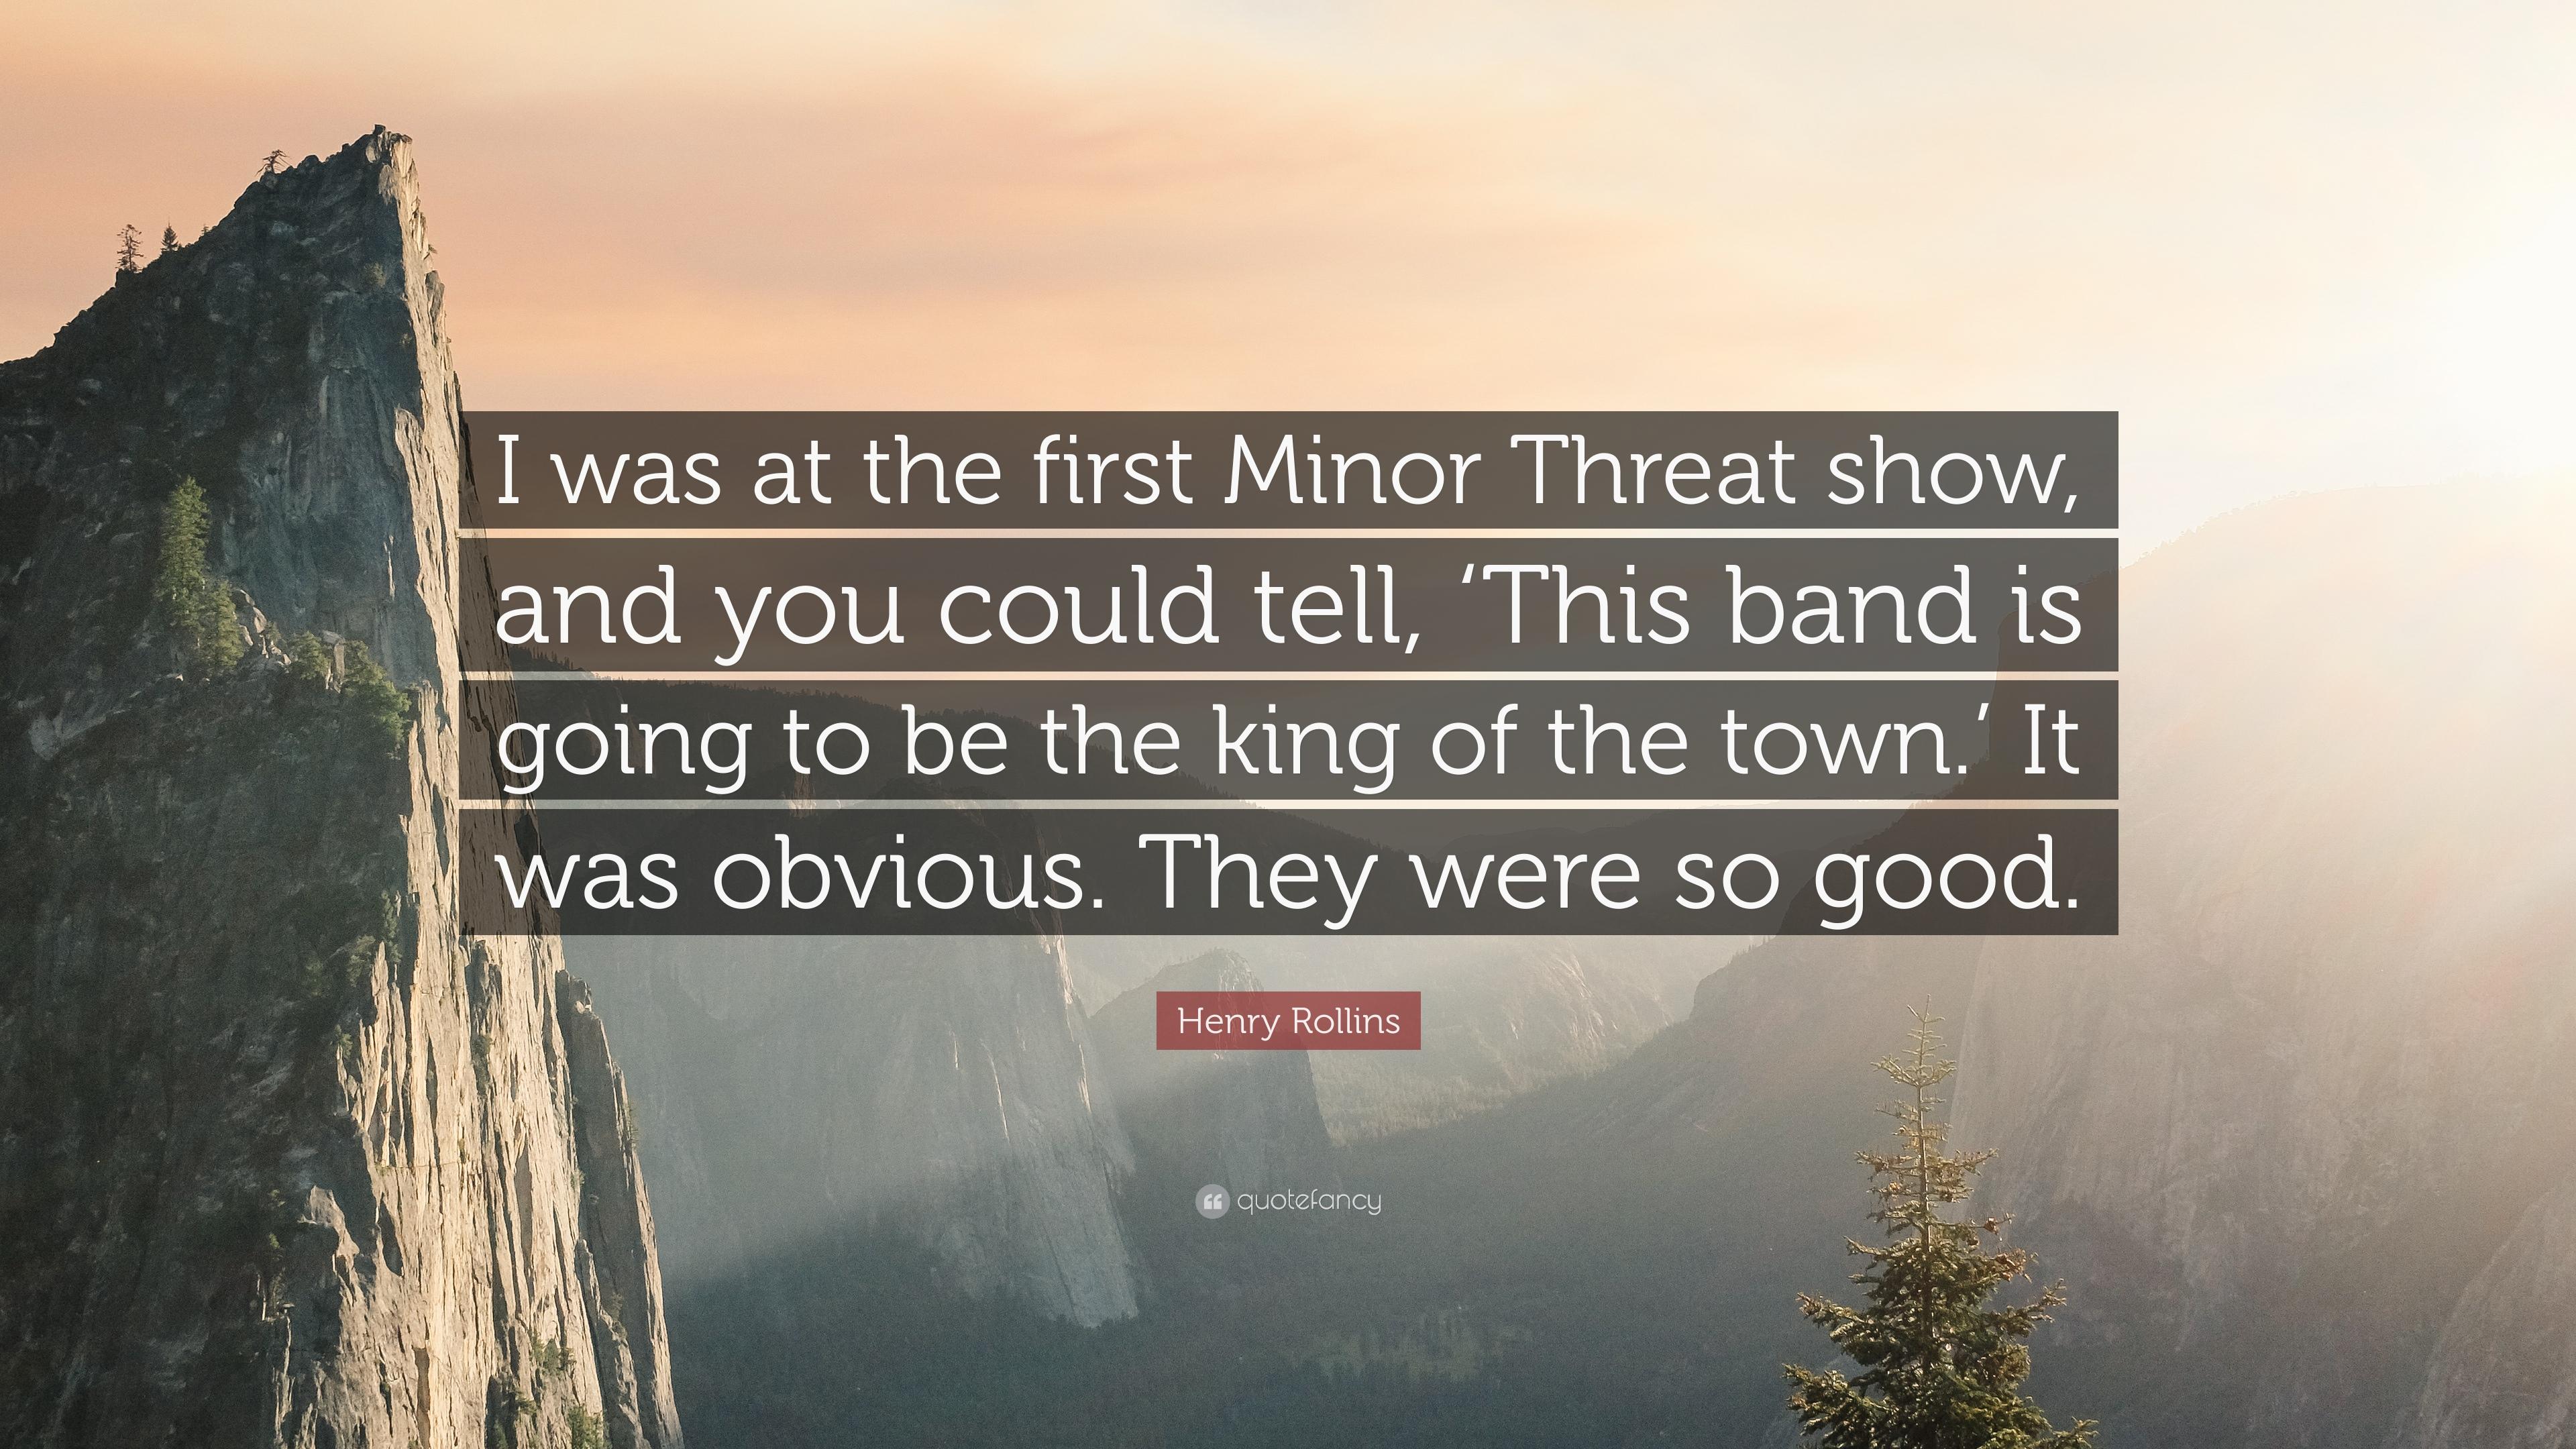 Henry Rollins Quote: “I was at the first Minor Threat show, and you